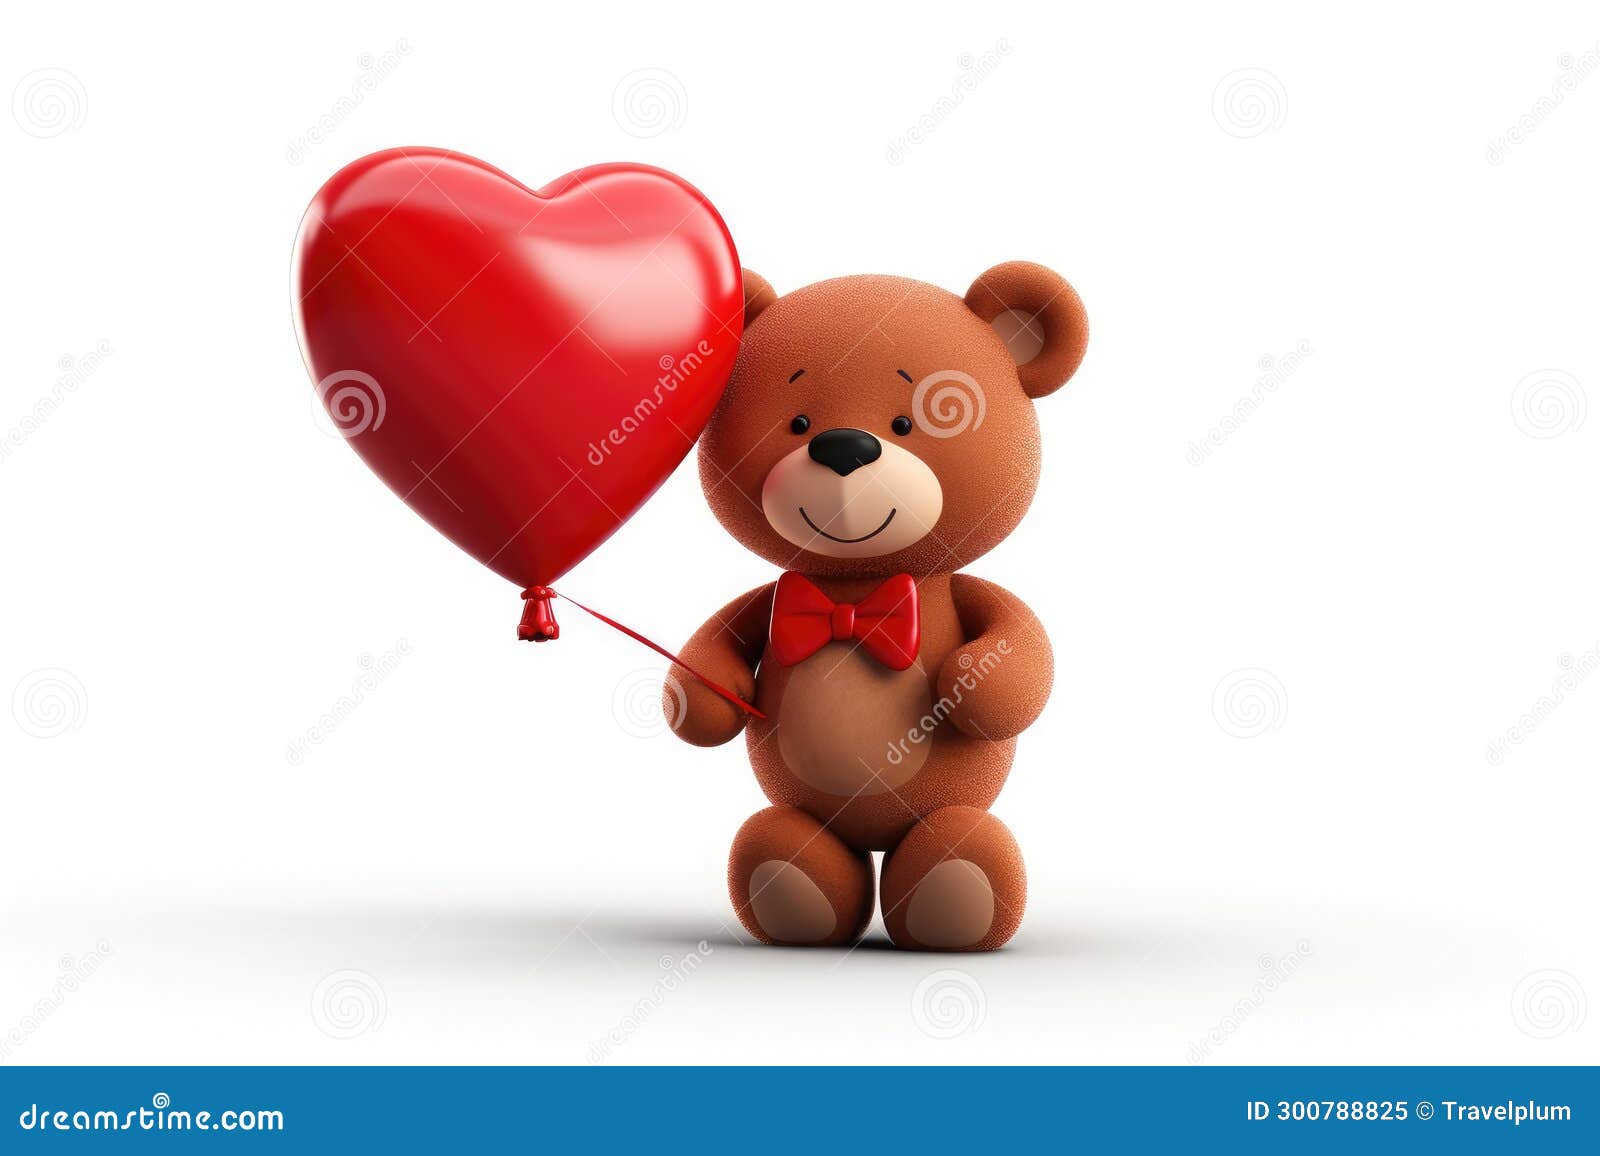 Valentines Day Clipart-valentines day bear holding heart balloon clipart